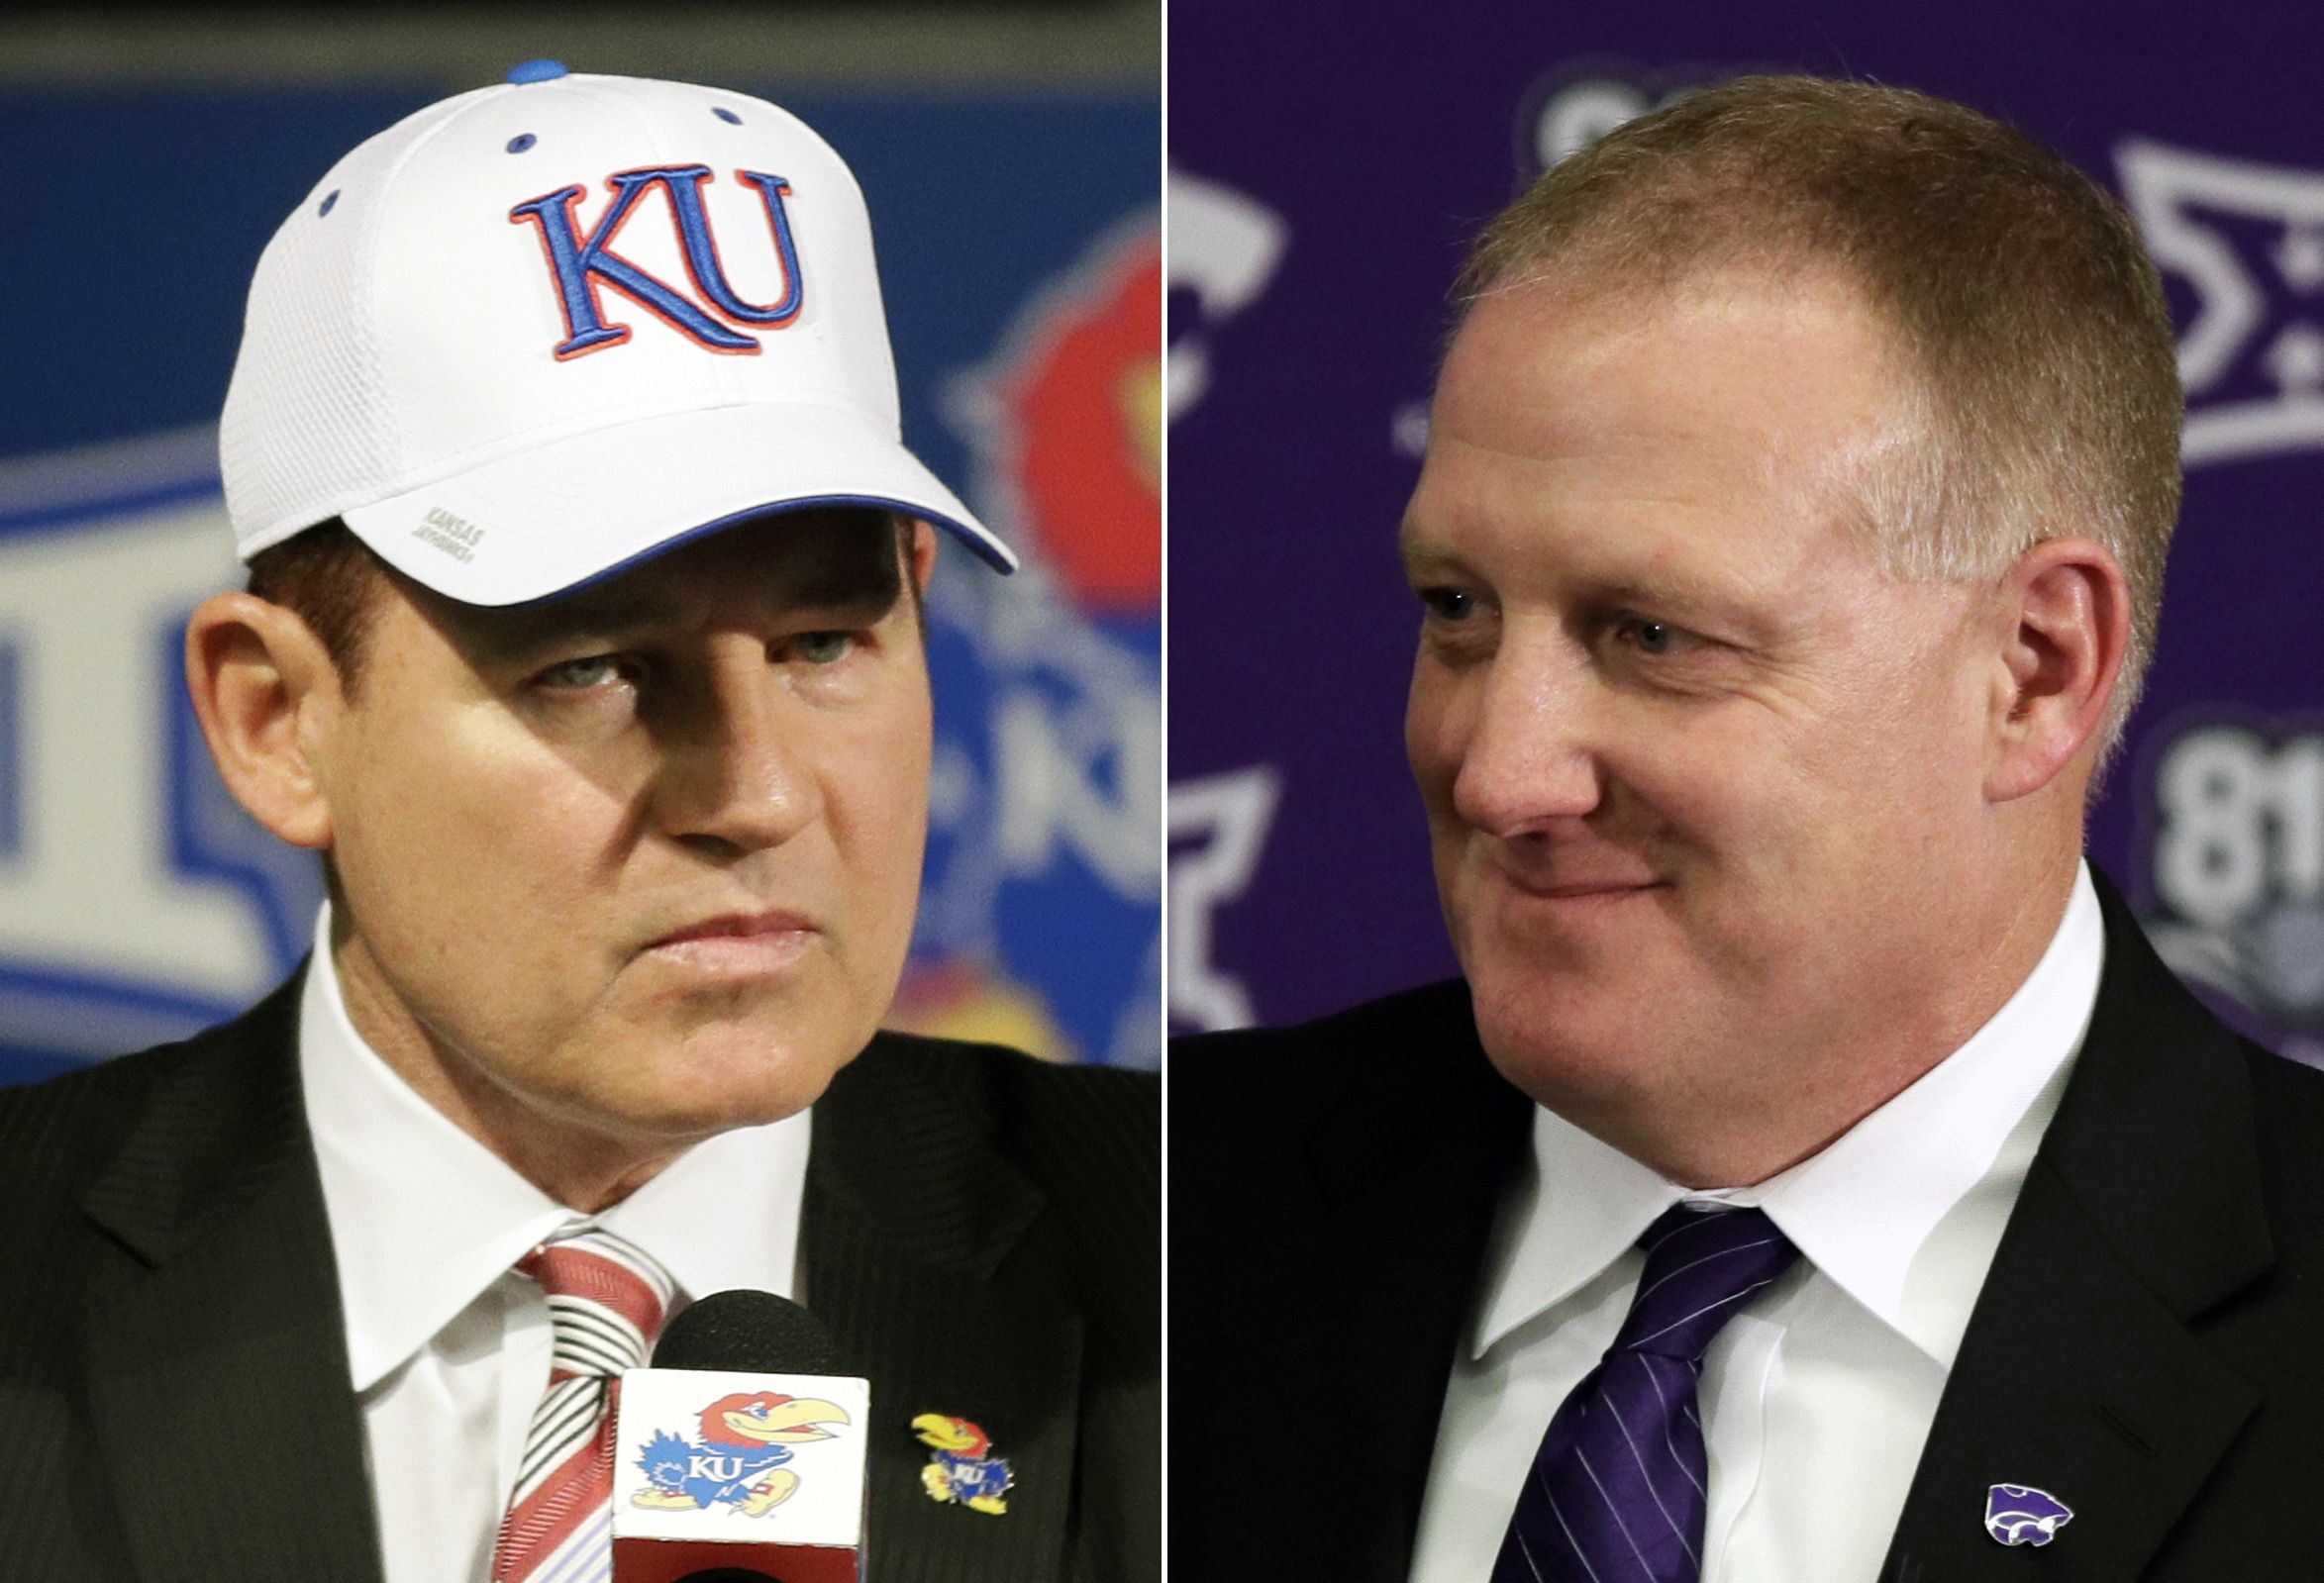 New coaches at Kansas, K-State are studies in contrast